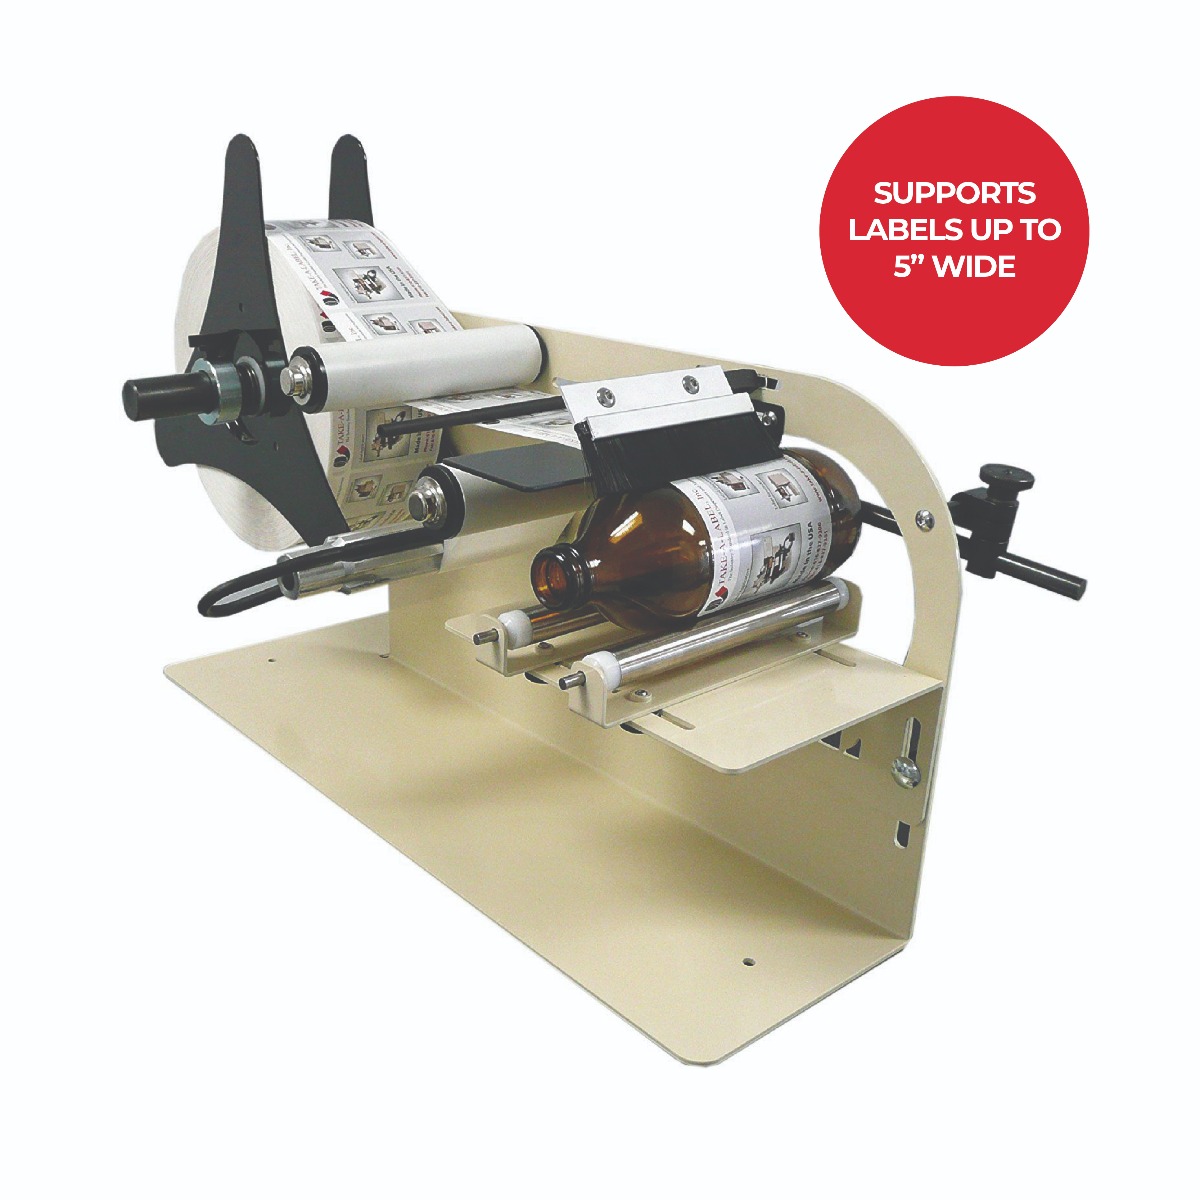 Take-A-Label TAL-1100MR Manual Round Product Label Applicator